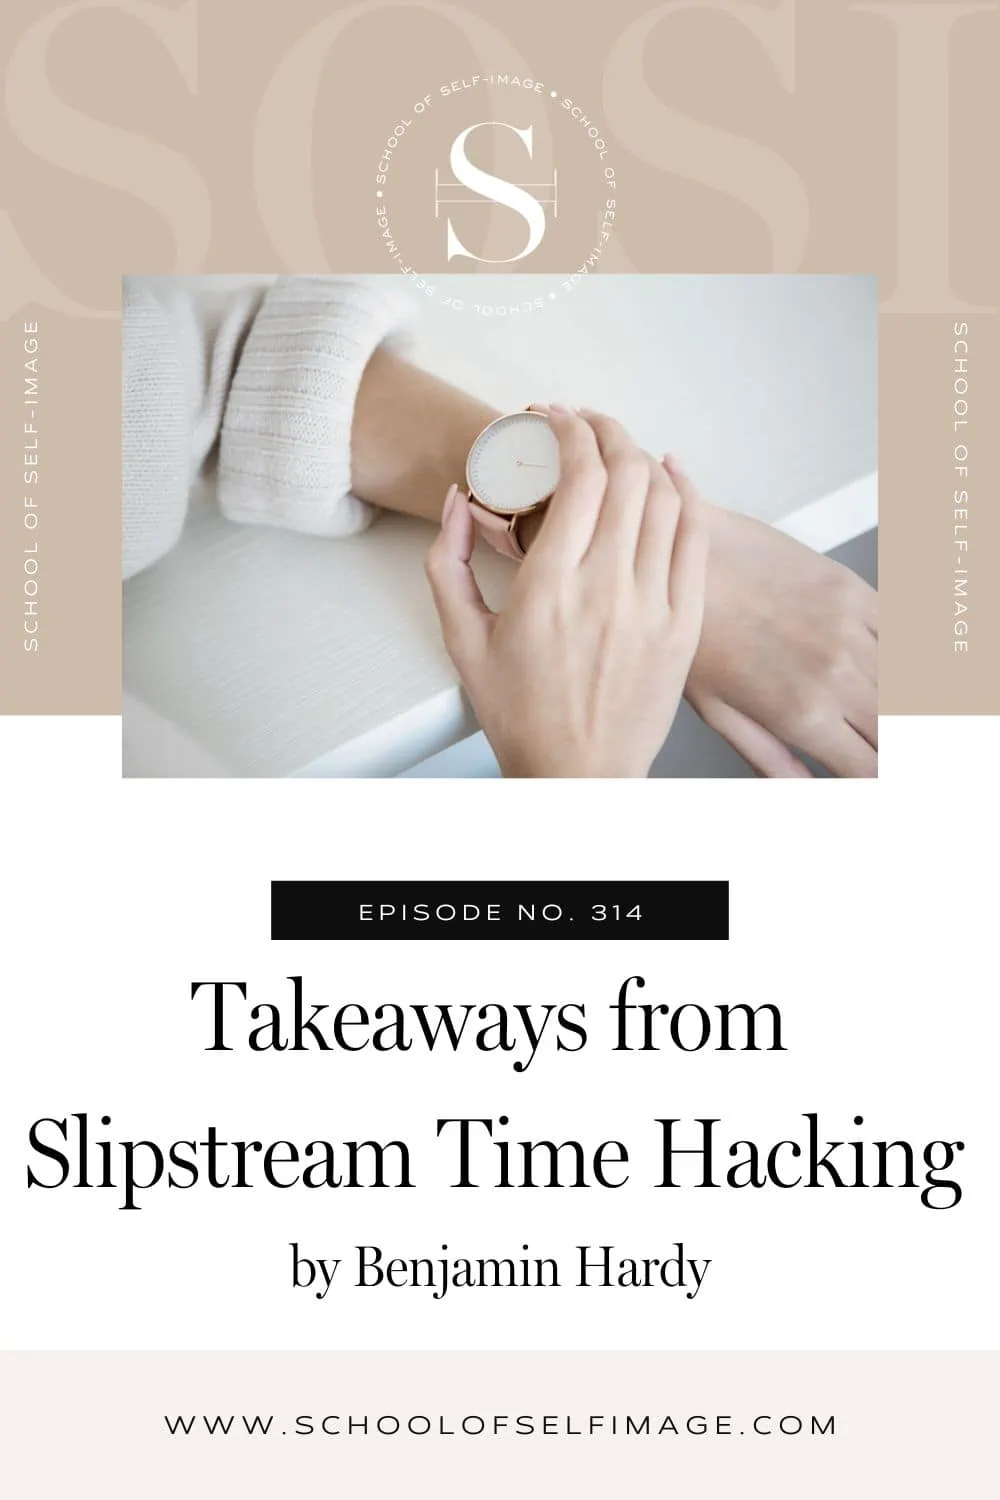 Takeaways from Slipstream Time Hacking by Benjamin Hardy